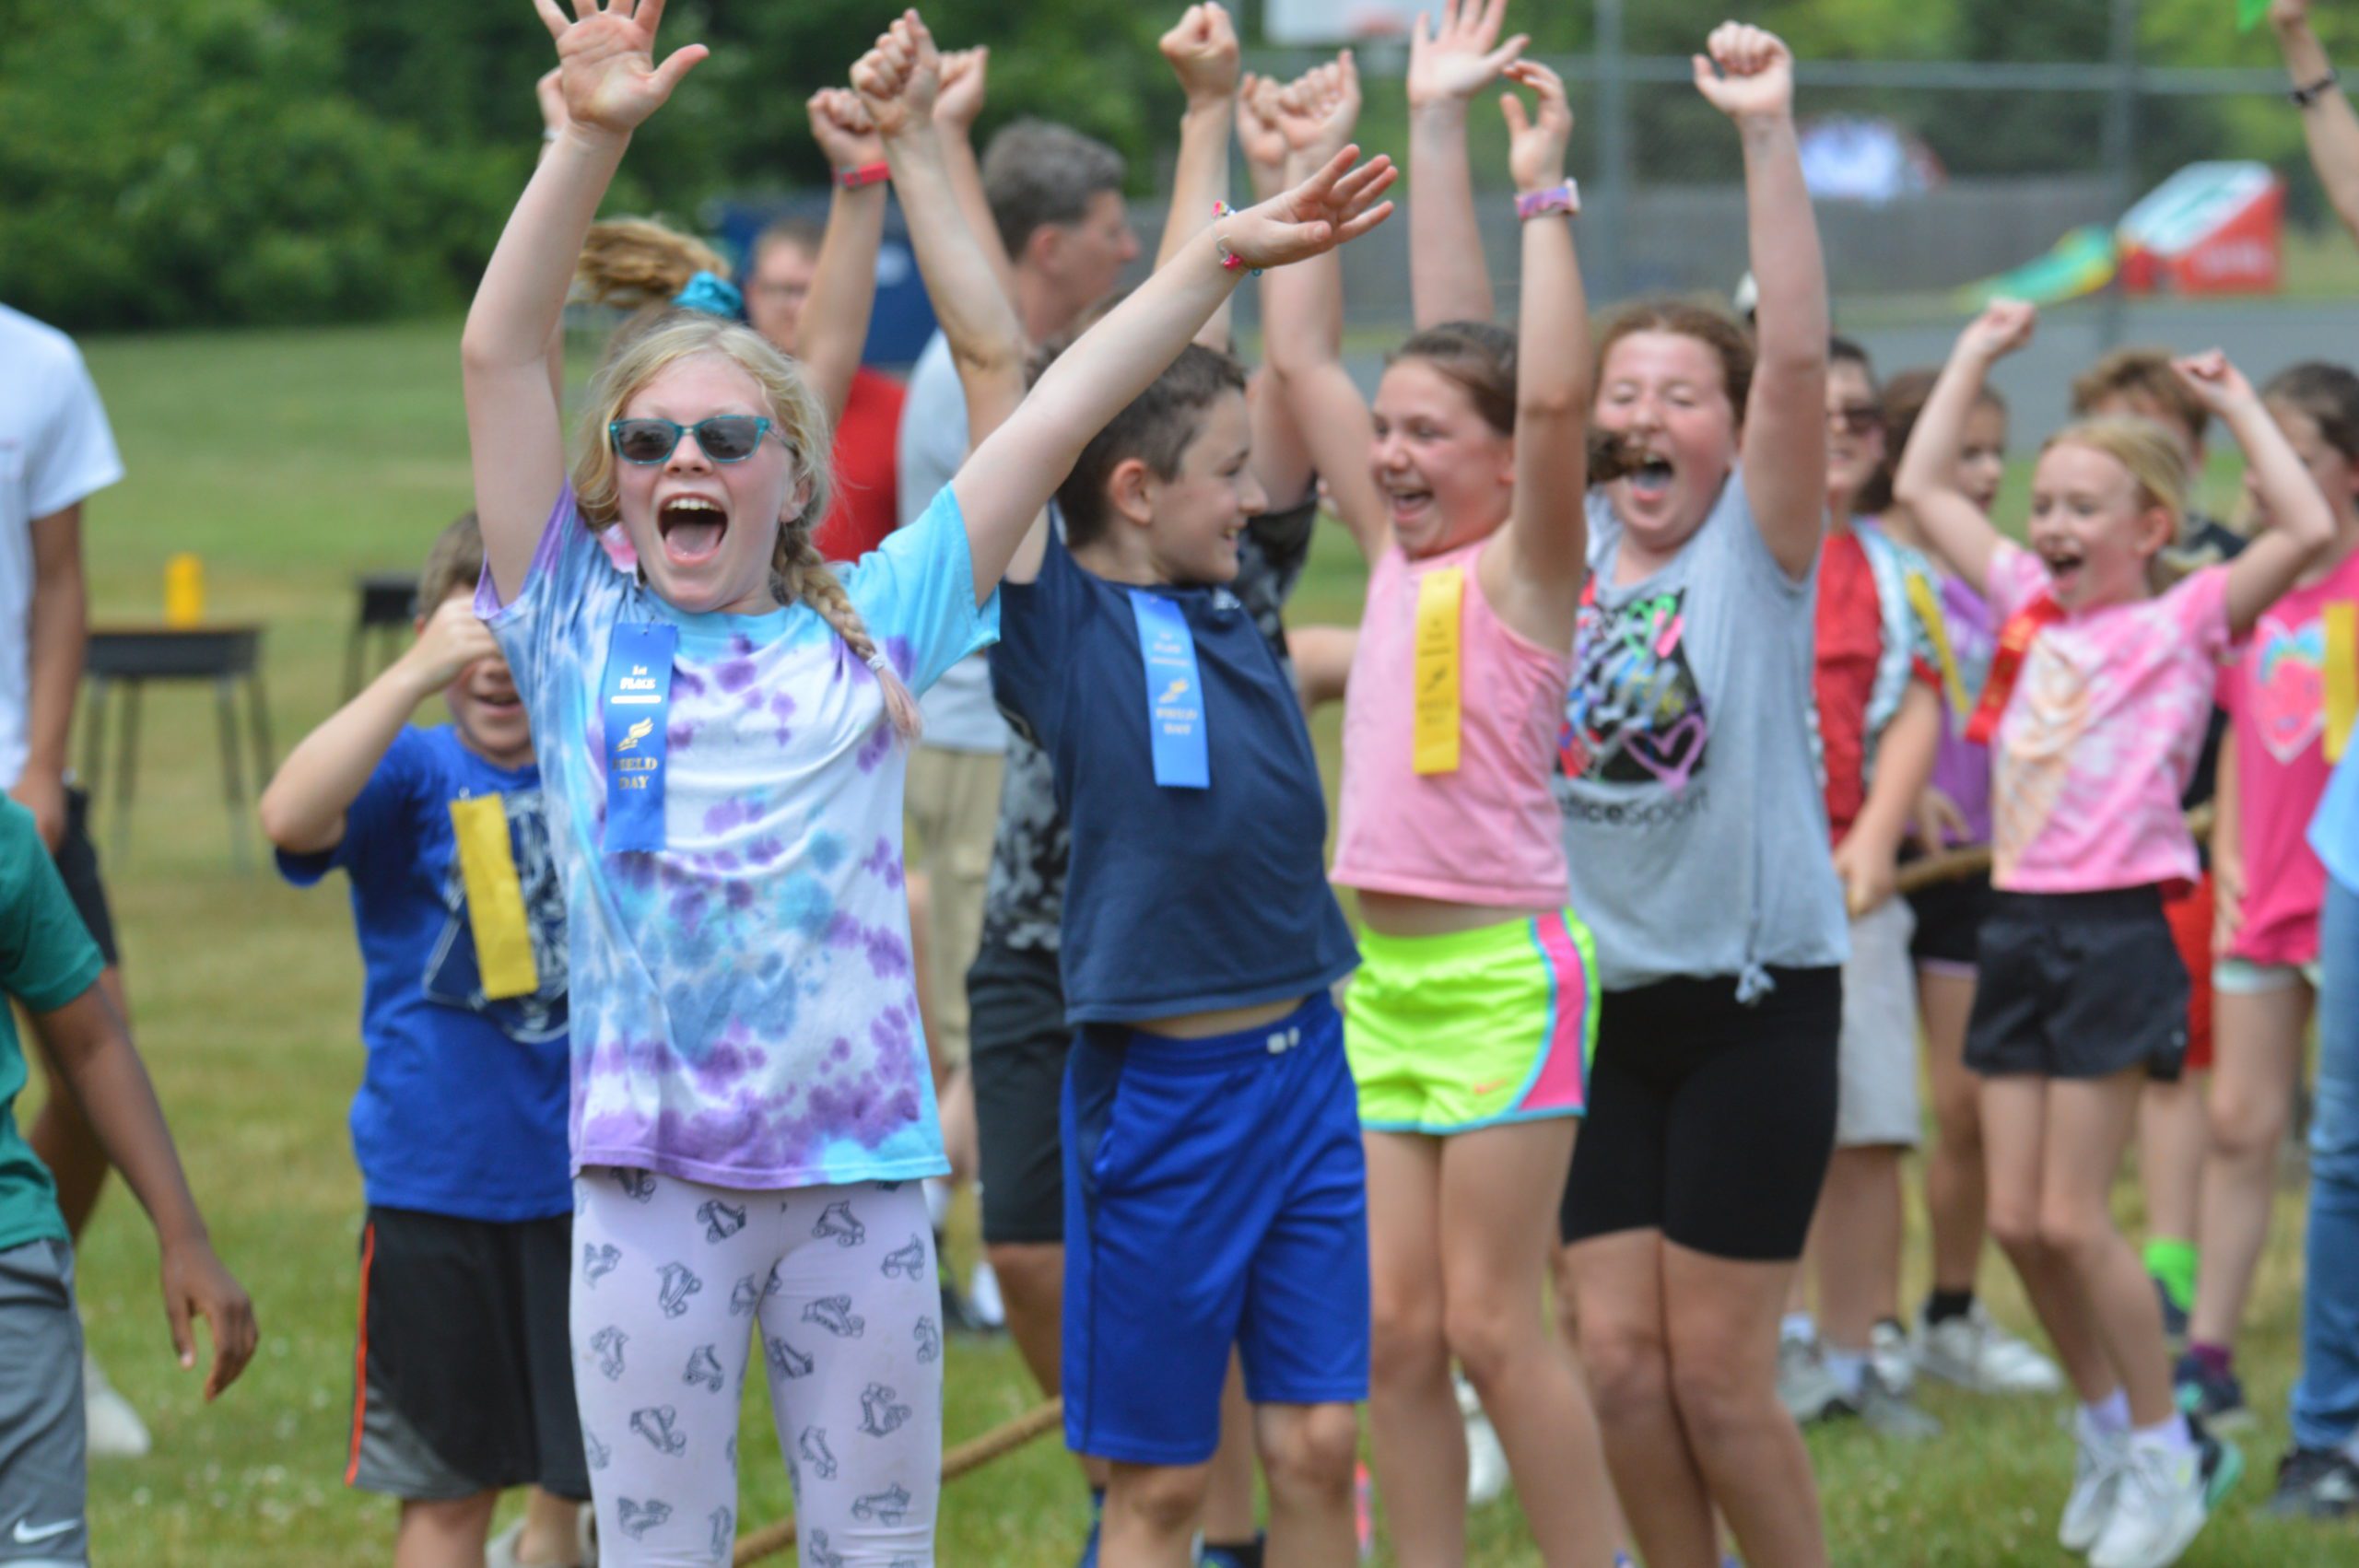 Students celebrate at Field Day